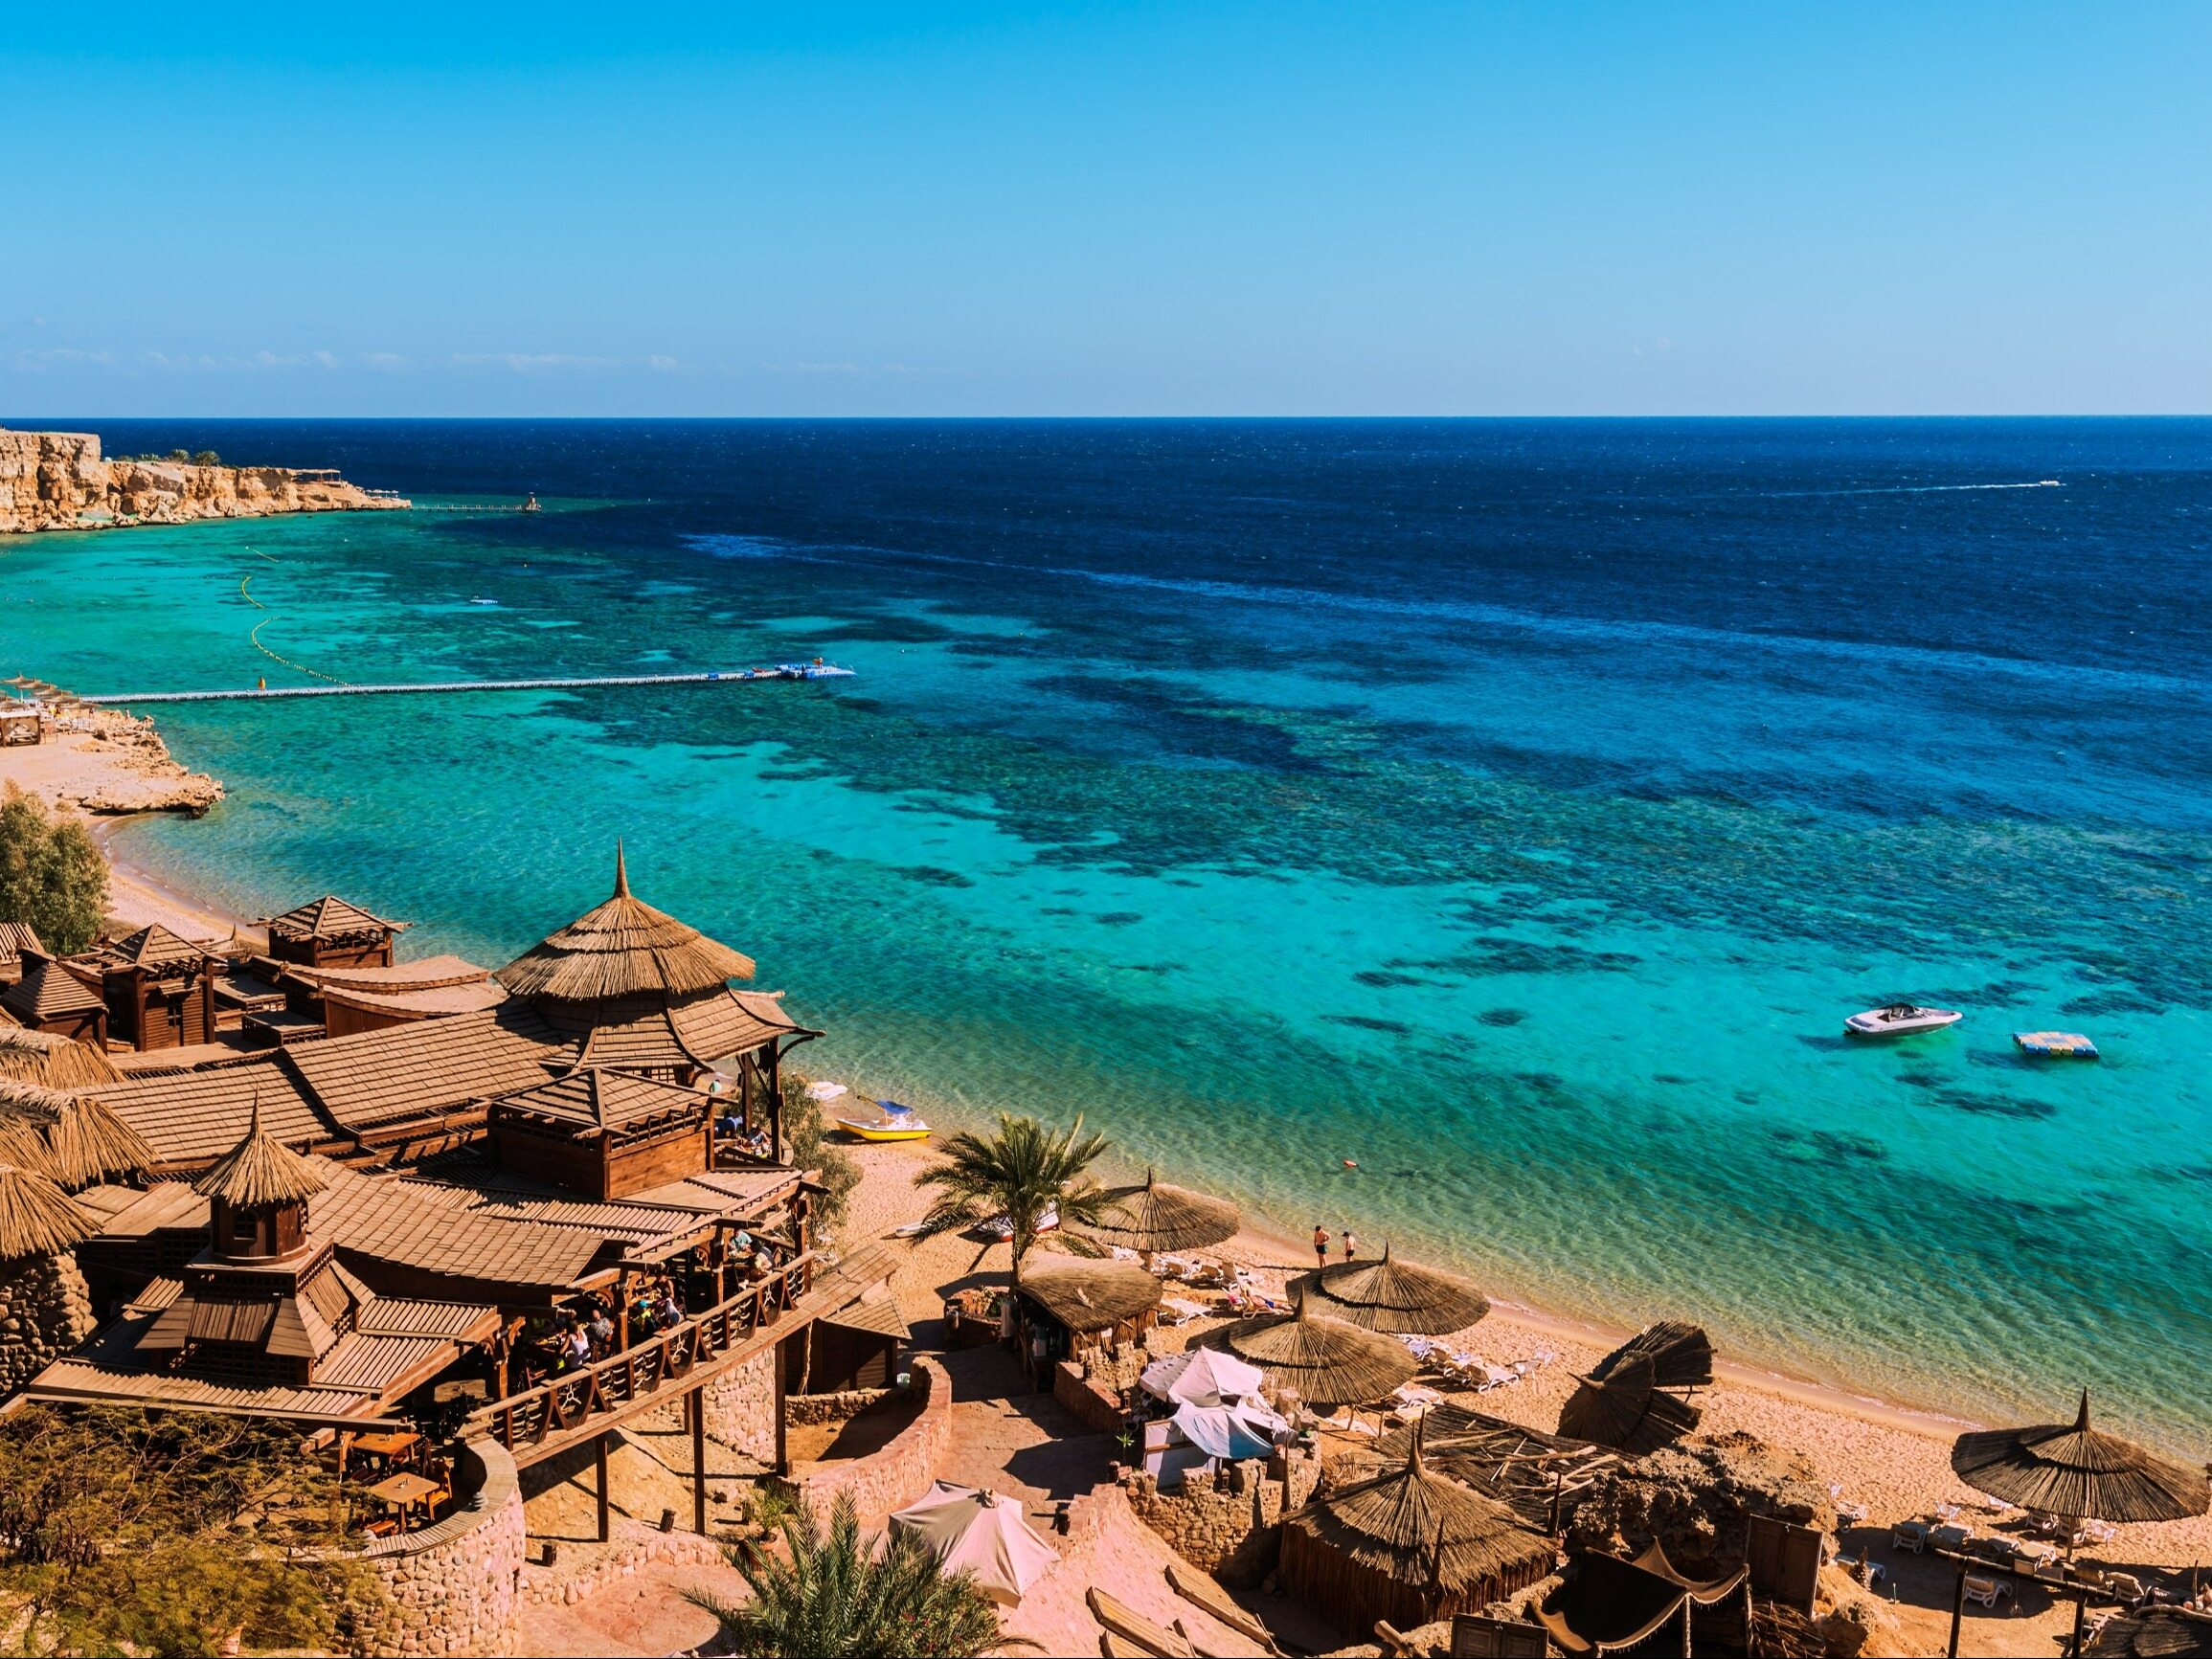 It has never been so cheap.  9 days in Egypt with all inclusive for PLN 1,000